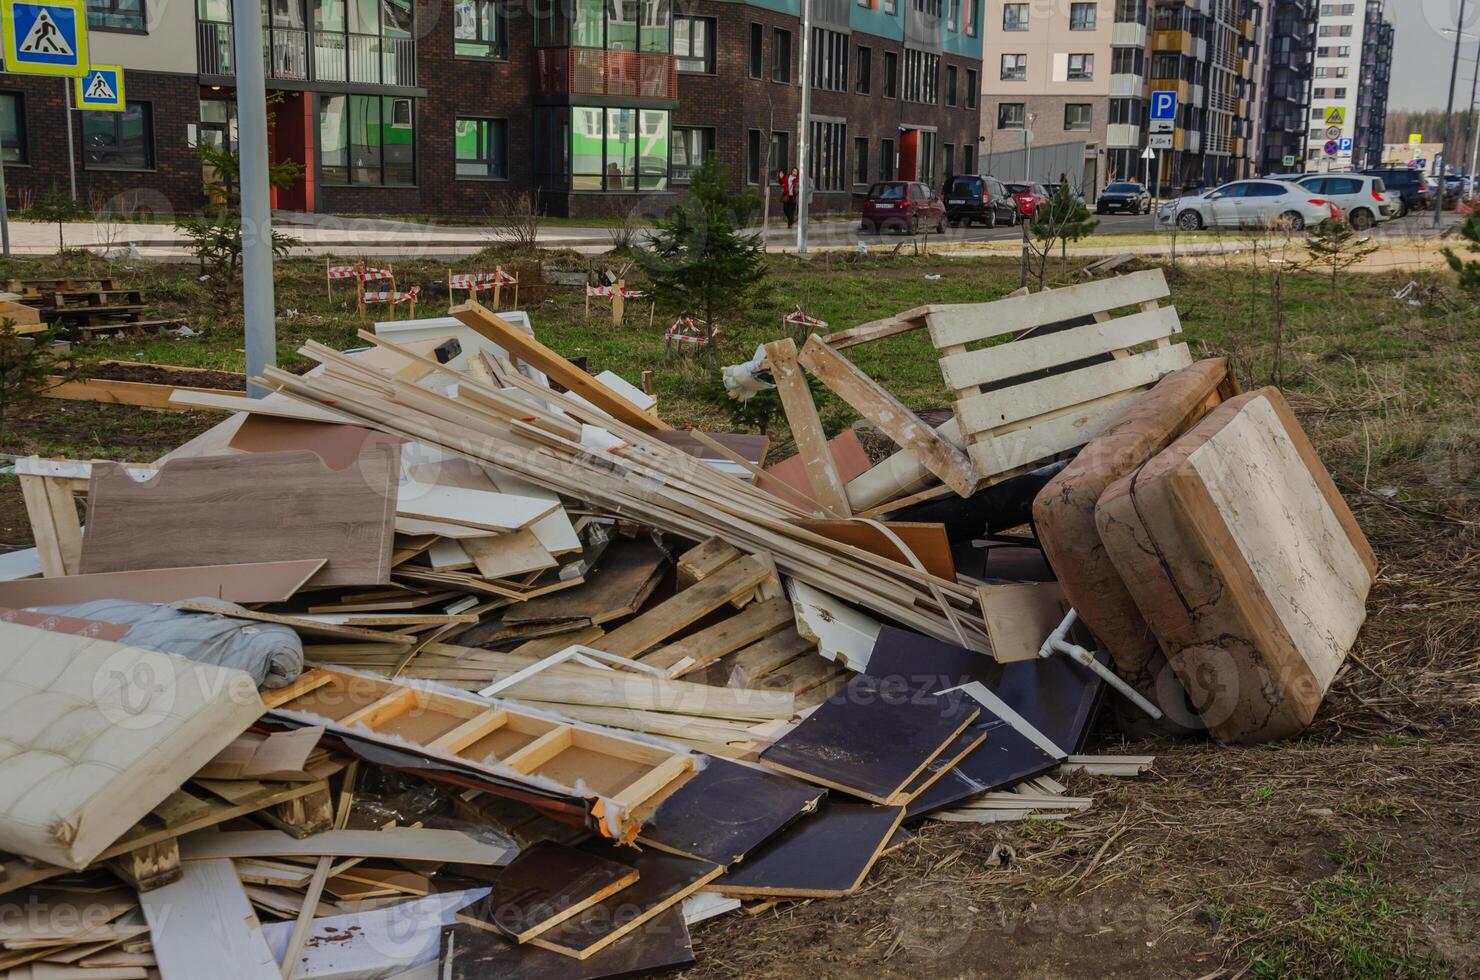 Garbage is lying in the city next to residential buildings photo